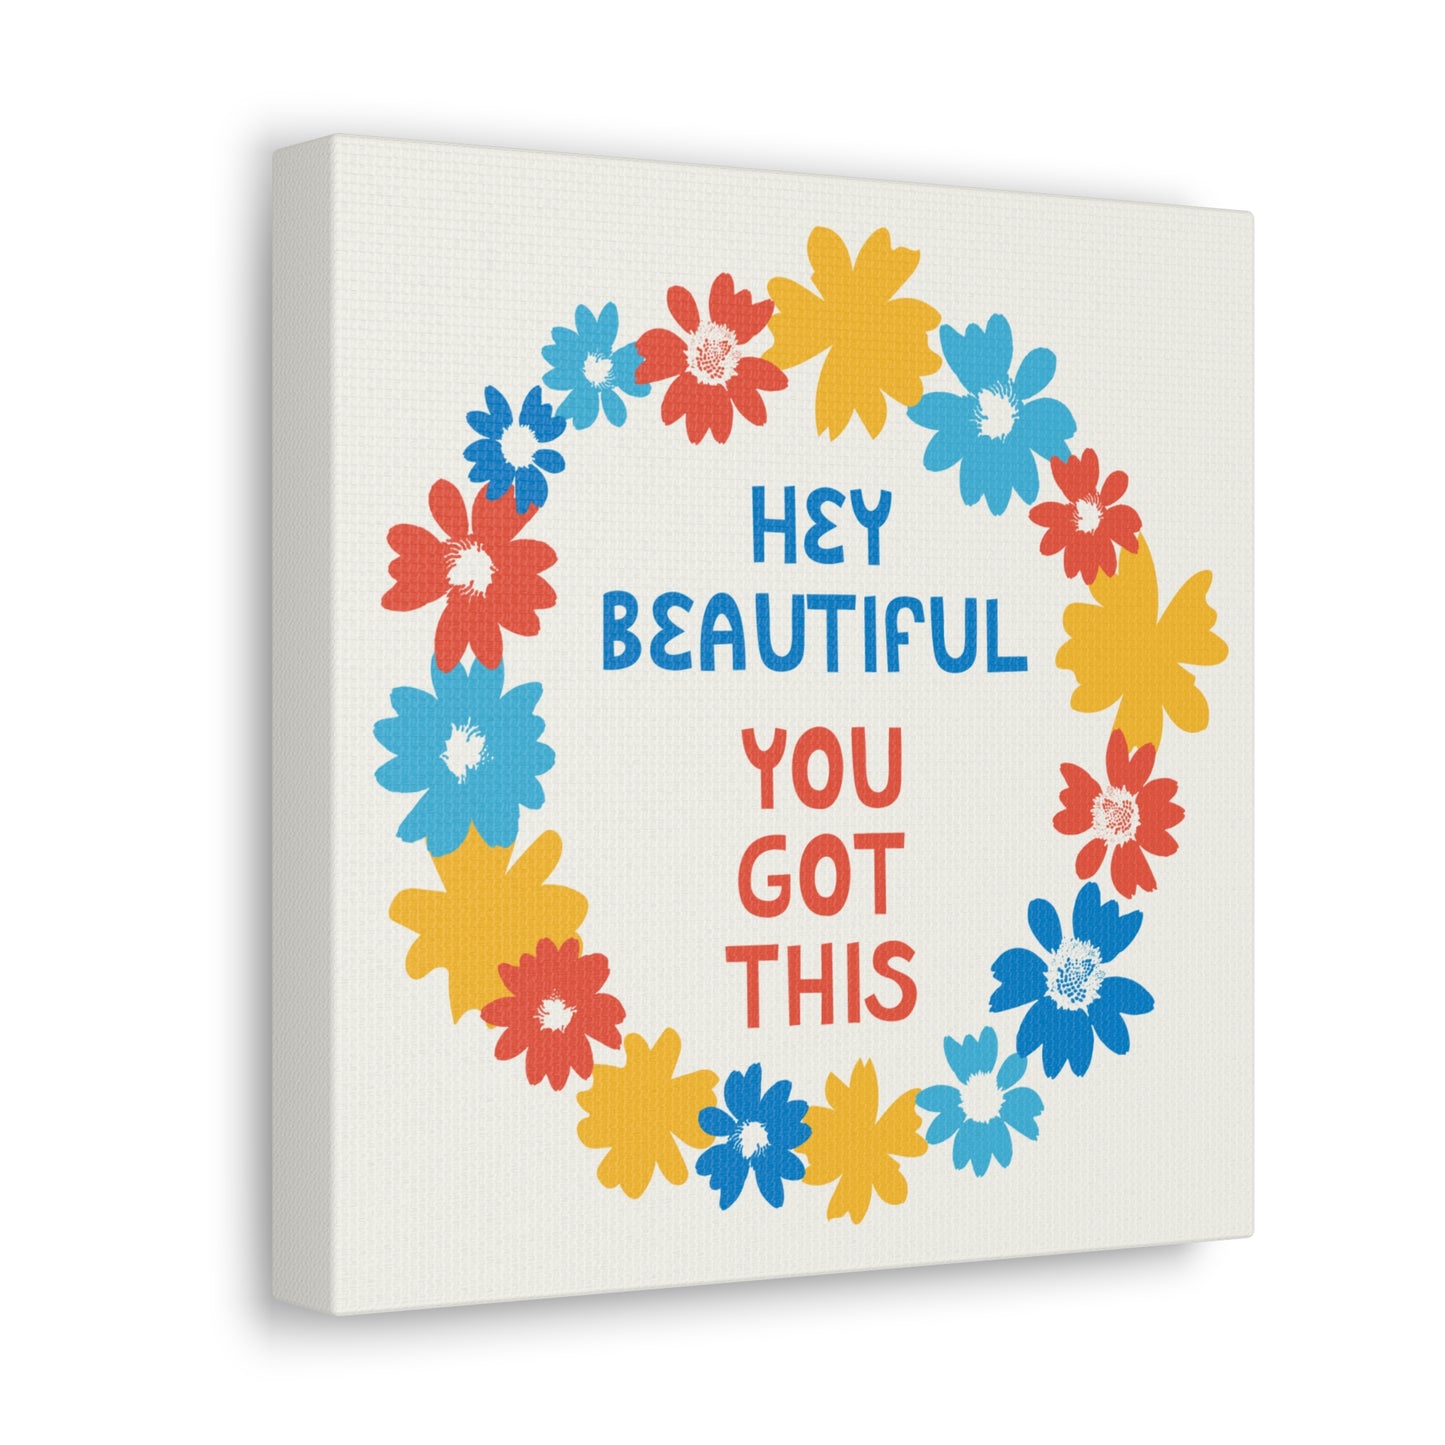 Hey Beautiful, You Got This Canvas Gallery Wrap